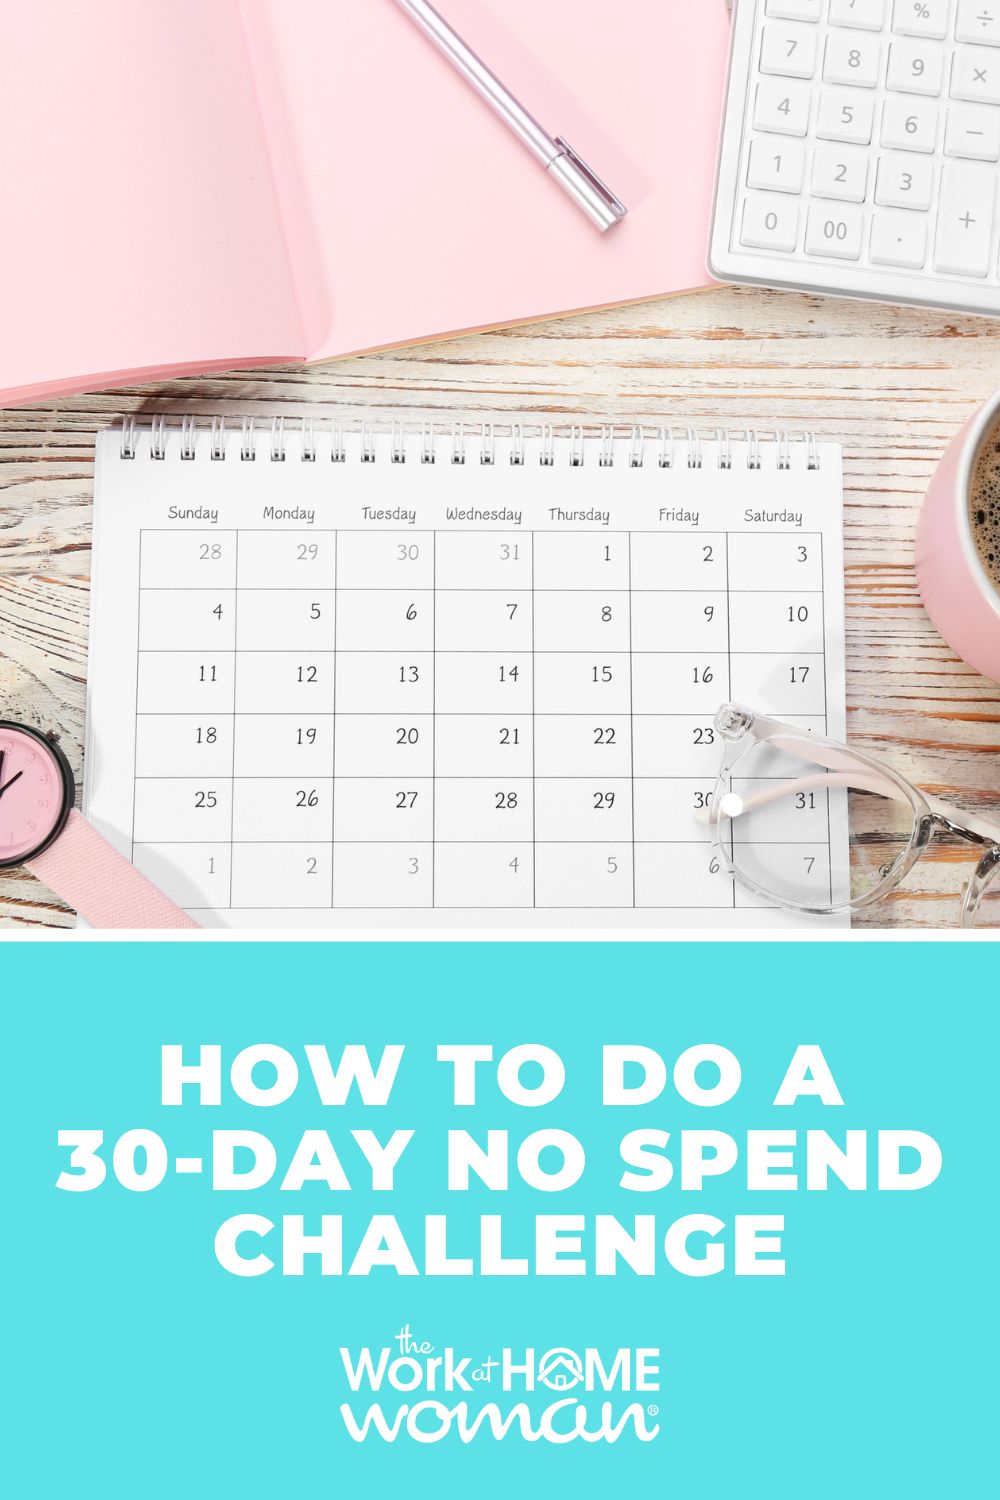 Tired of living paycheck to paycheck? One way to regain control over your finances is through a 30 day no spend challenge. Here's how to begin.